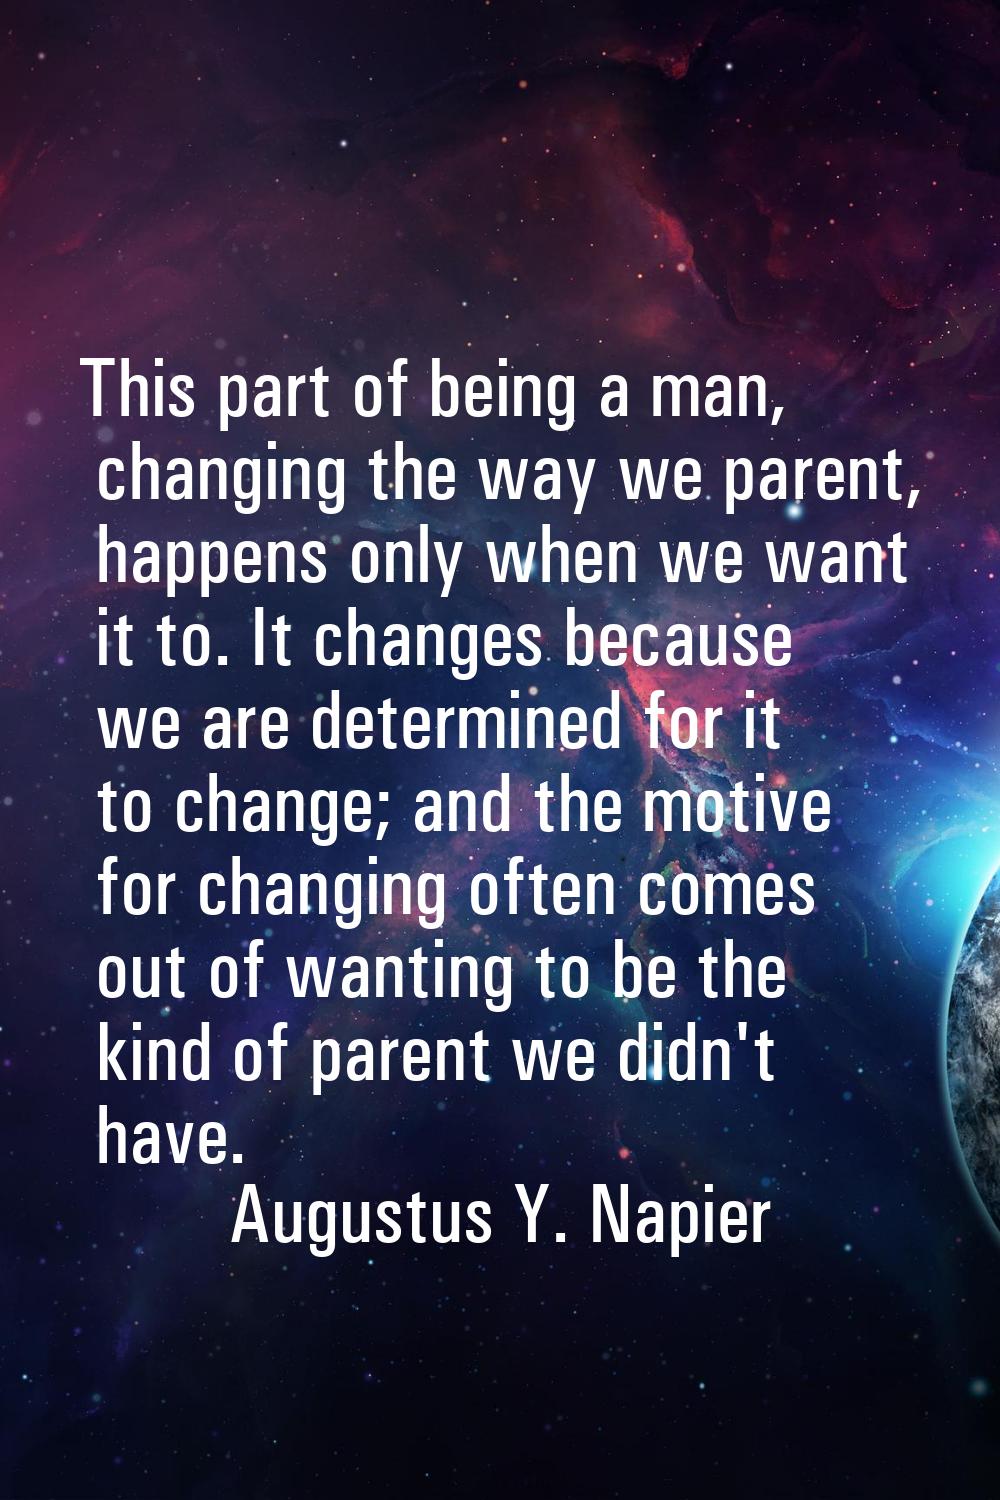 This part of being a man, changing the way we parent, happens only when we want it to. It changes b